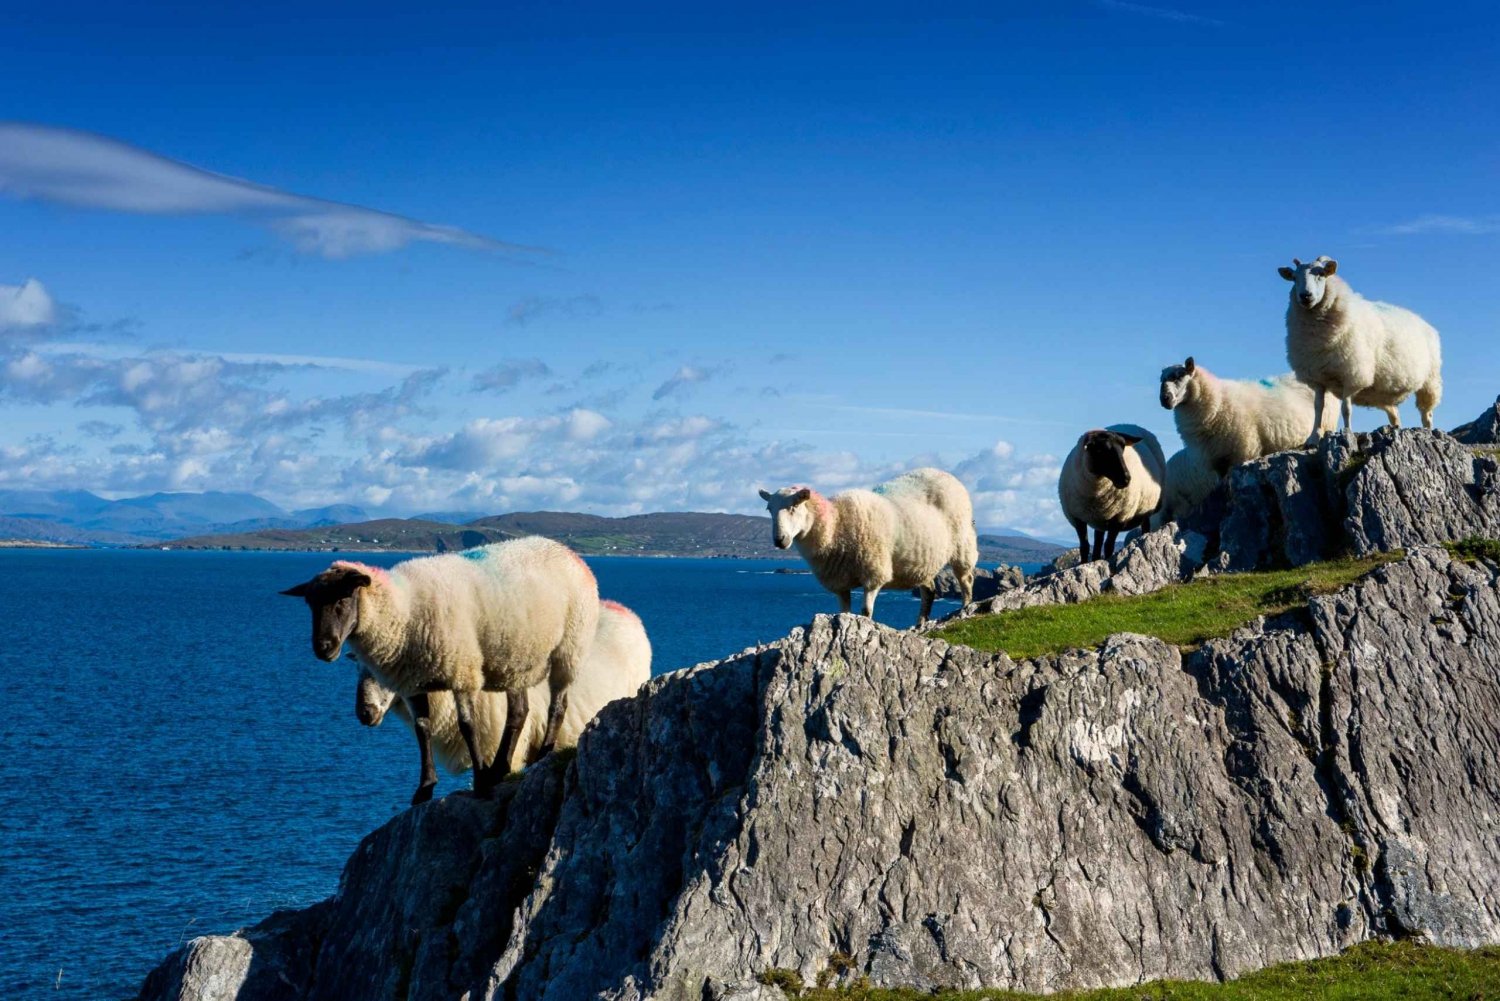 Private Wild Atlantic Day Tour from Cork